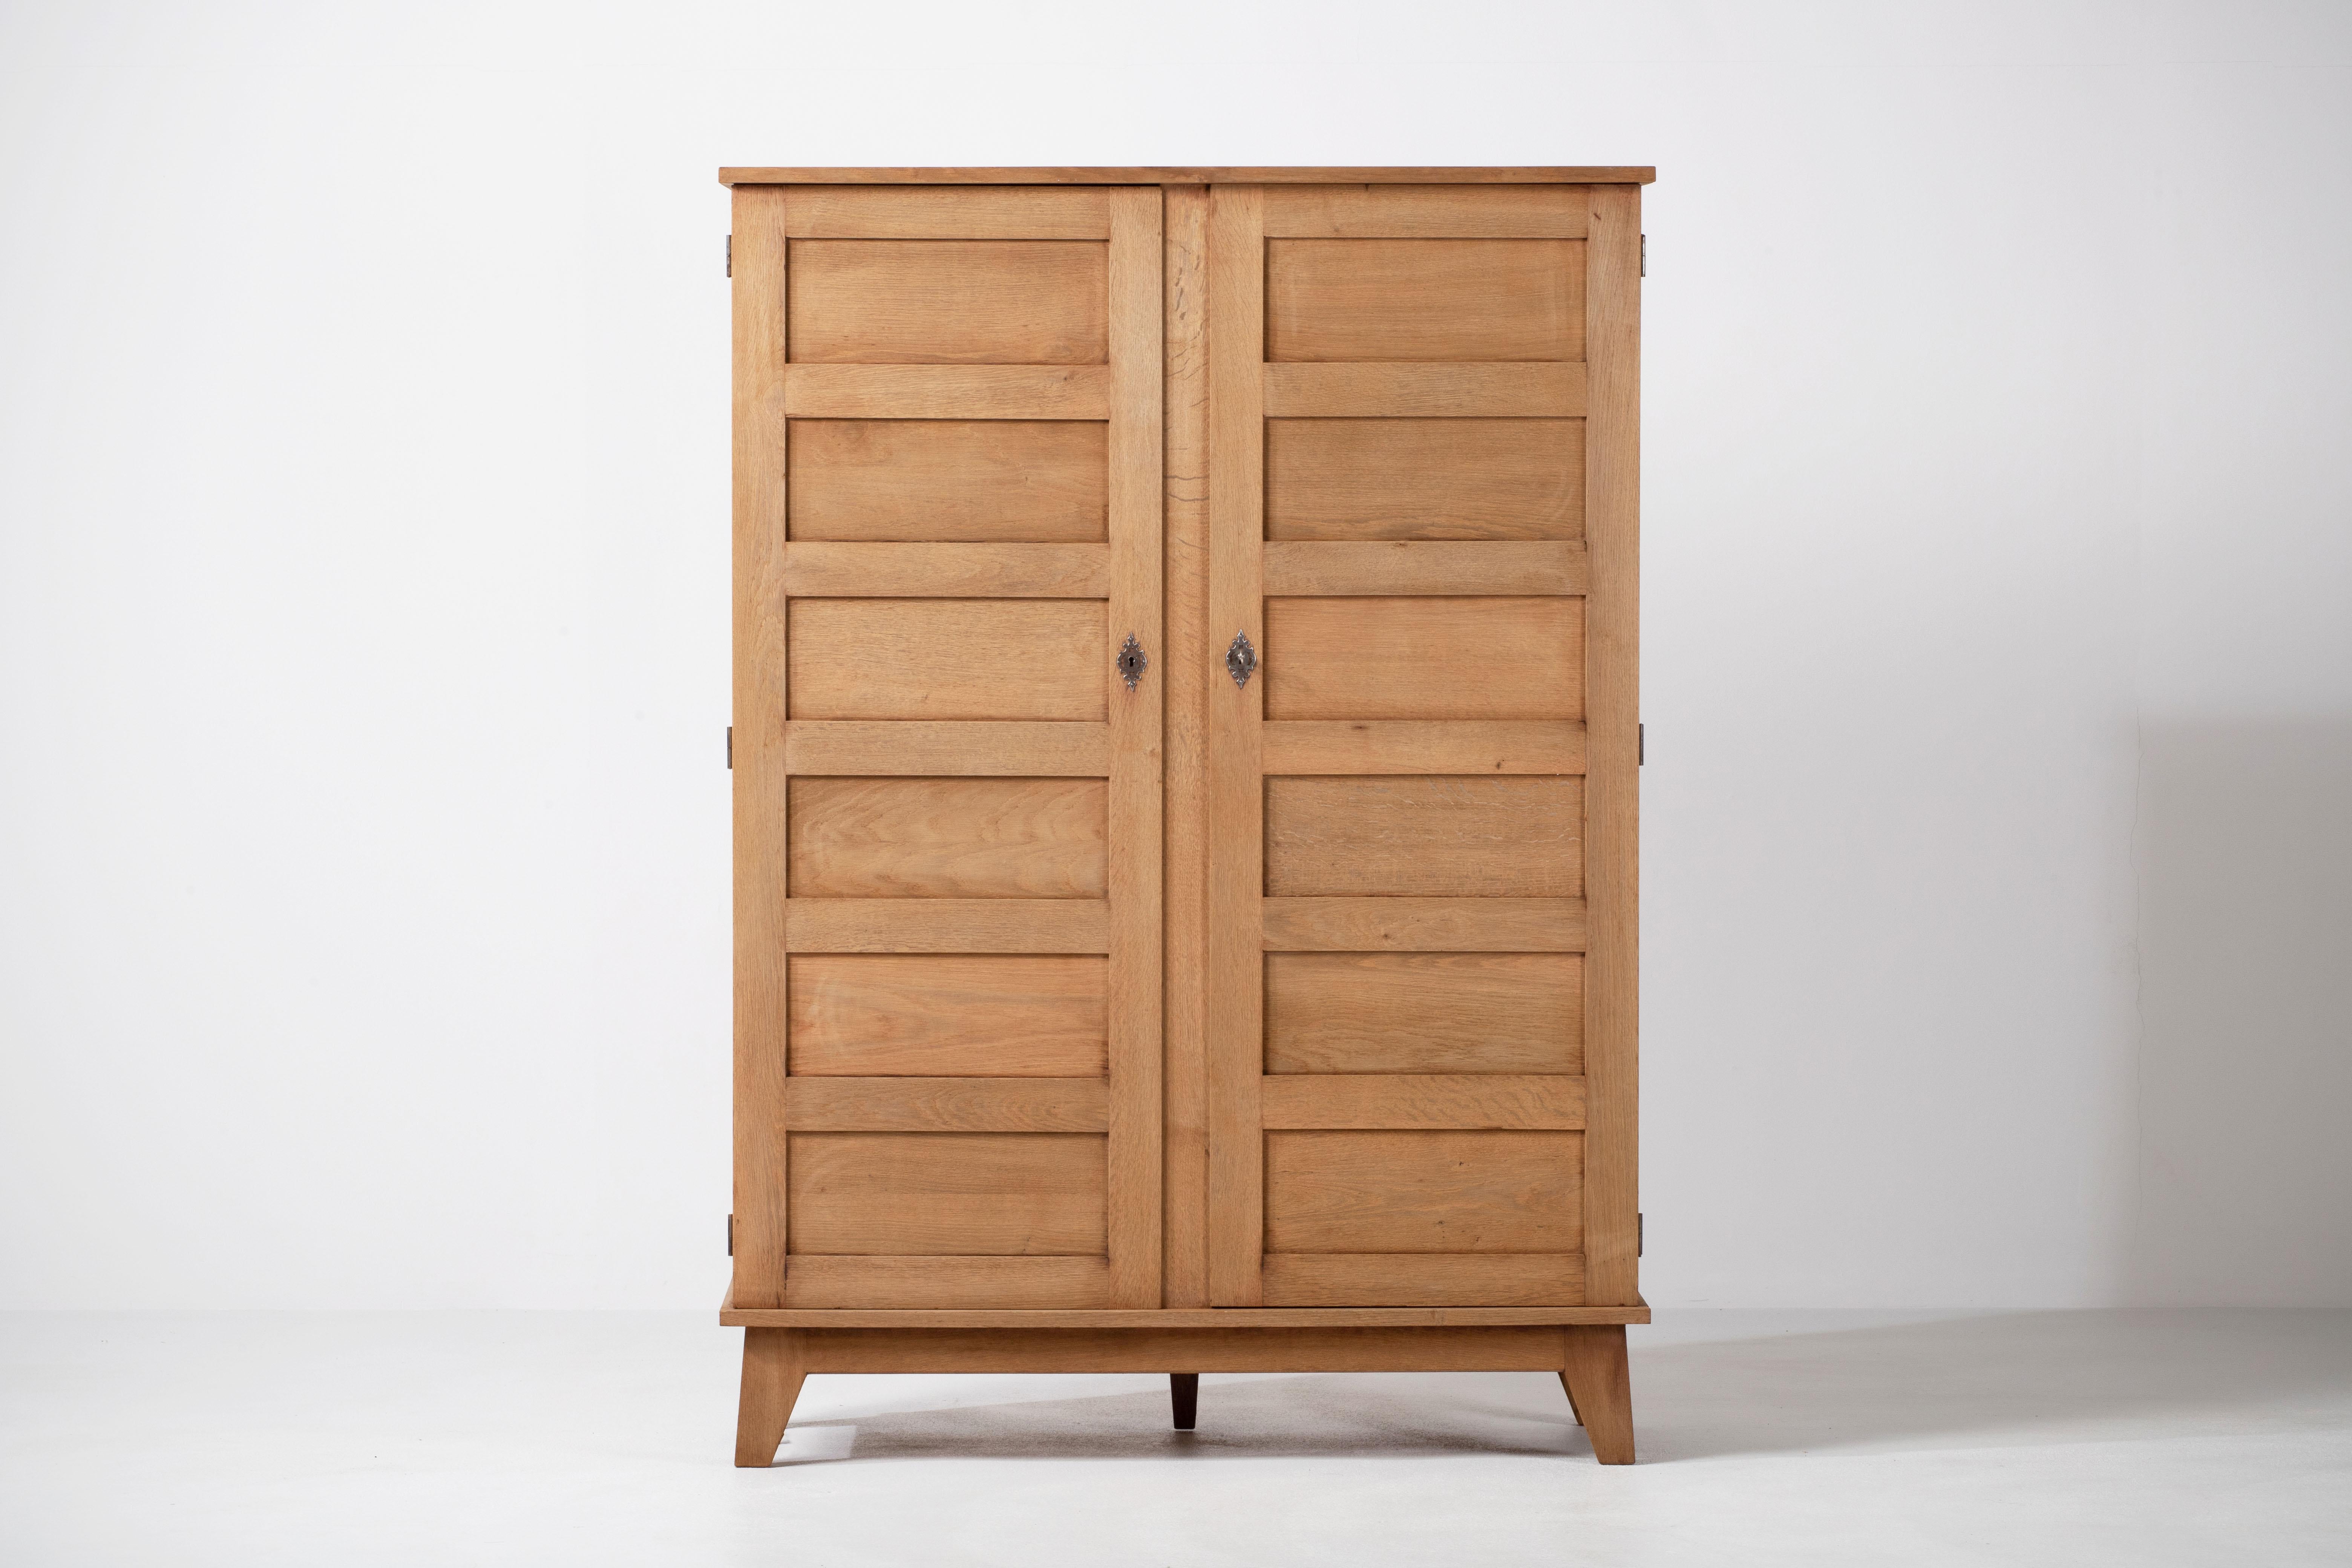 French Reconstruction Armoire model S154 by René Gabriel for the 